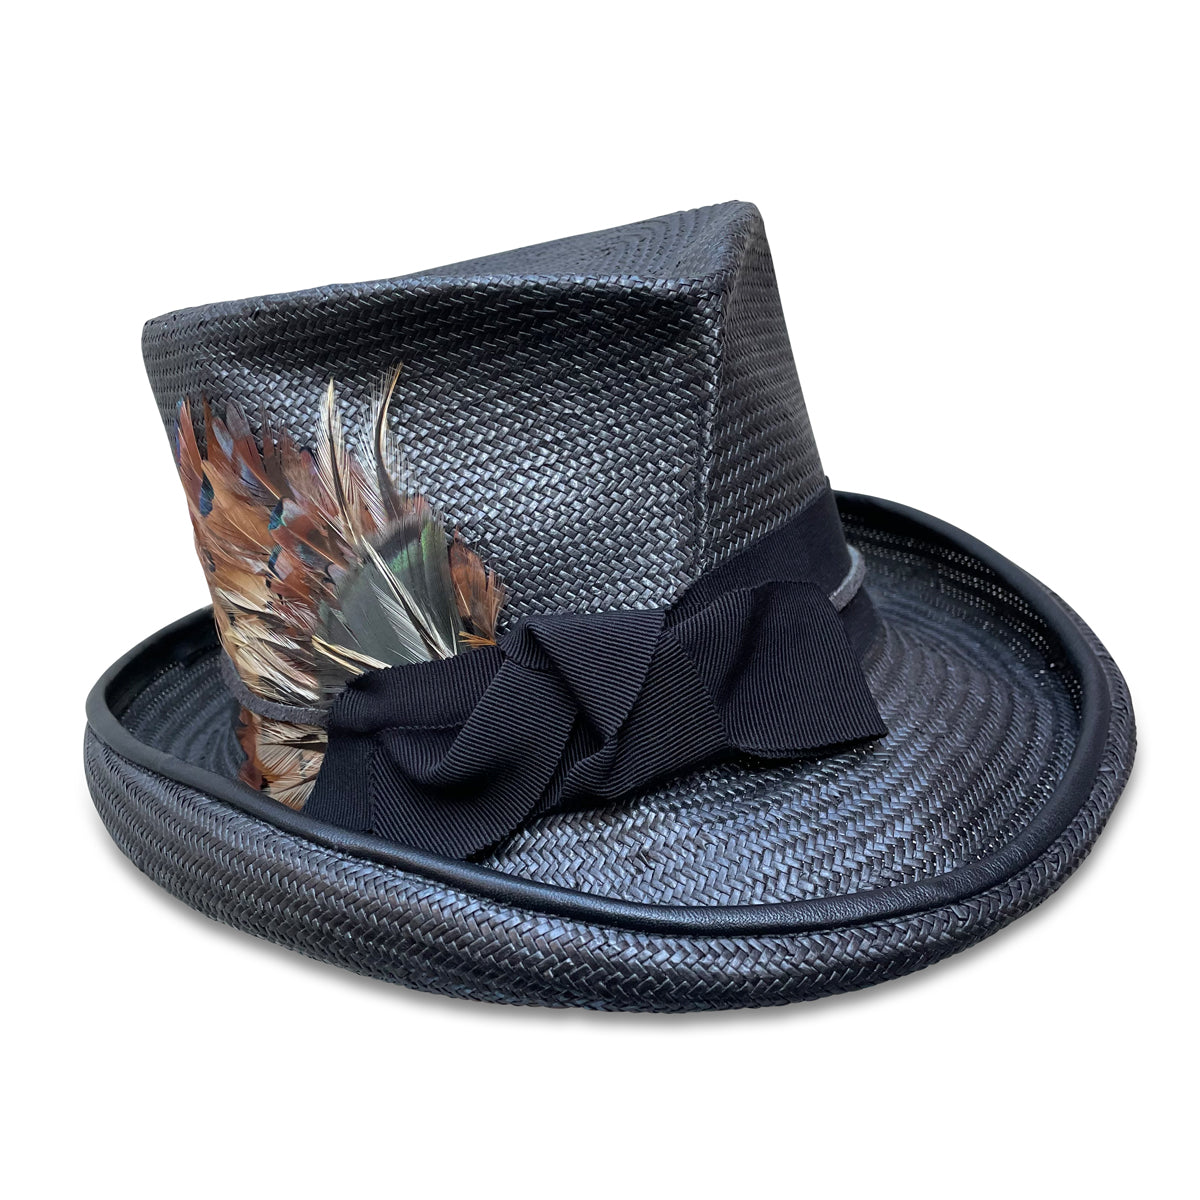 Diablo Everyday Top Hat from Cha Cha's House of Ill Repute in NYC, Black top hat